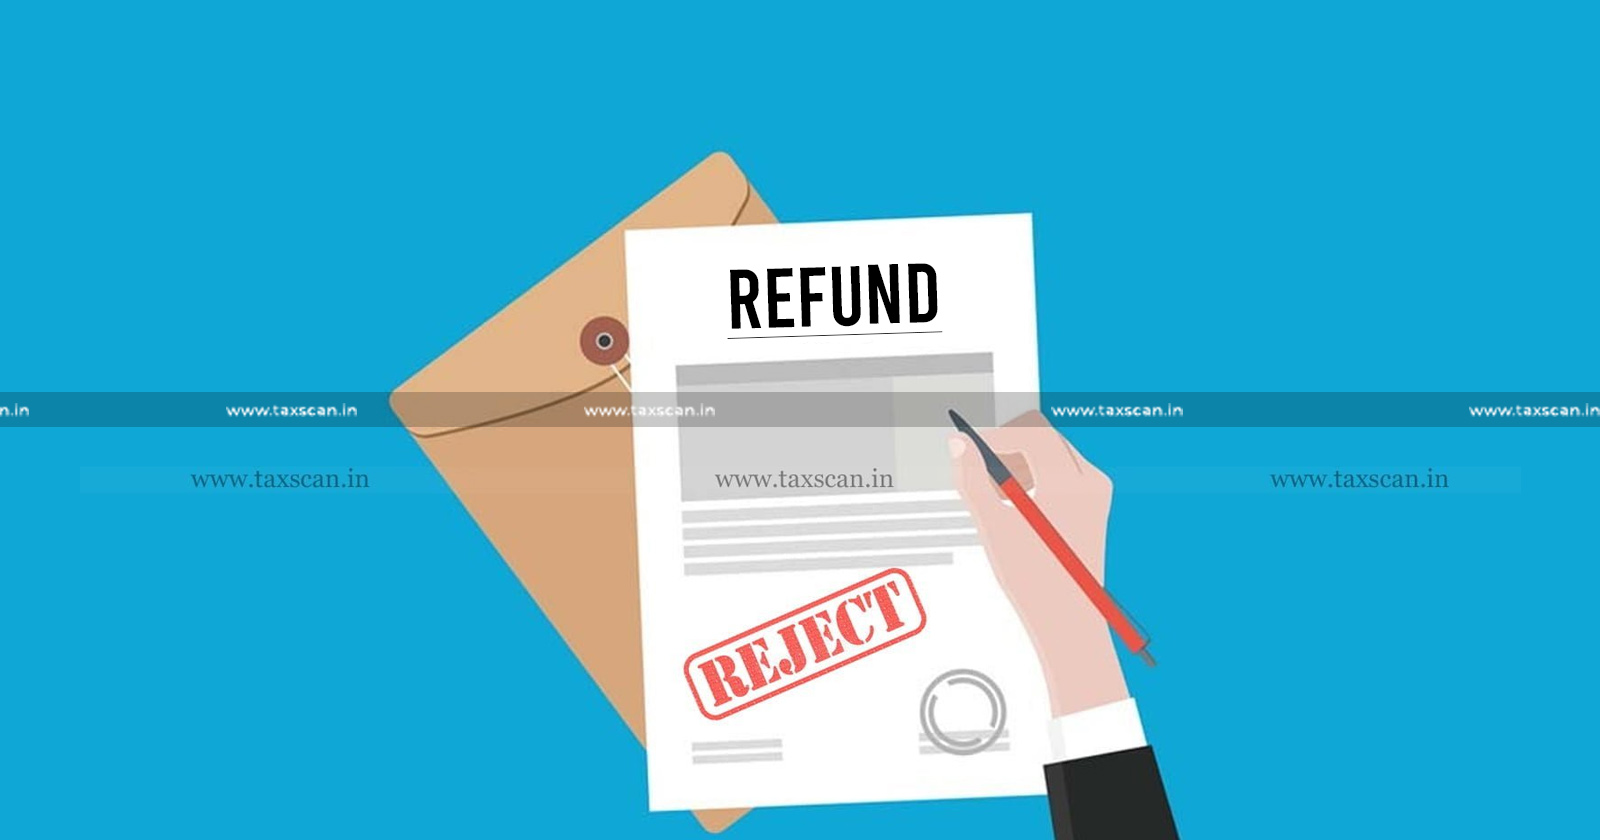 Tax Dept - Tax - Tax Dept Rejected Refund Application - Refund - Refund Application - Patna High Court - Patna High Court Deprecates Conduct of State Tax Authority - Taxscan